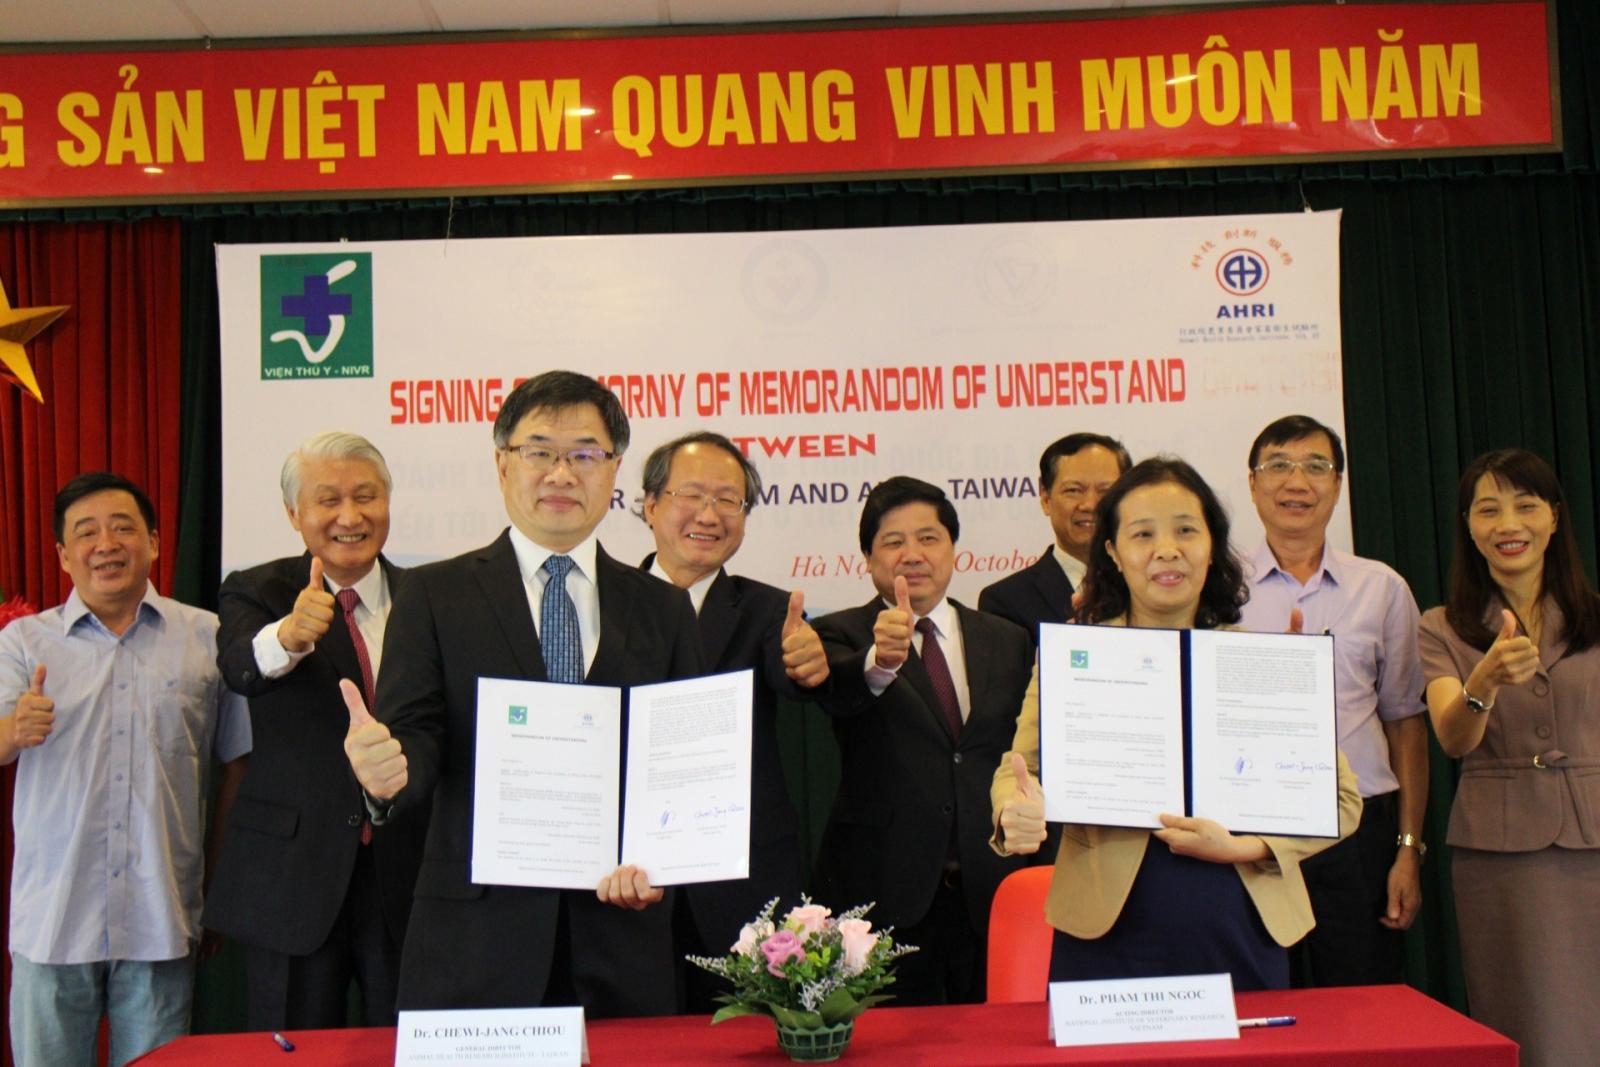 Director of the Animal Health Research Institute Chiu Chuan-zhang and the Director of the National Veterinary Research Institute of Vietnam, Dr. Pham Thi Ngoc signed the MOU at Hanoi for defending African Swine Fever.   Attribute: Council of Agriculture Website